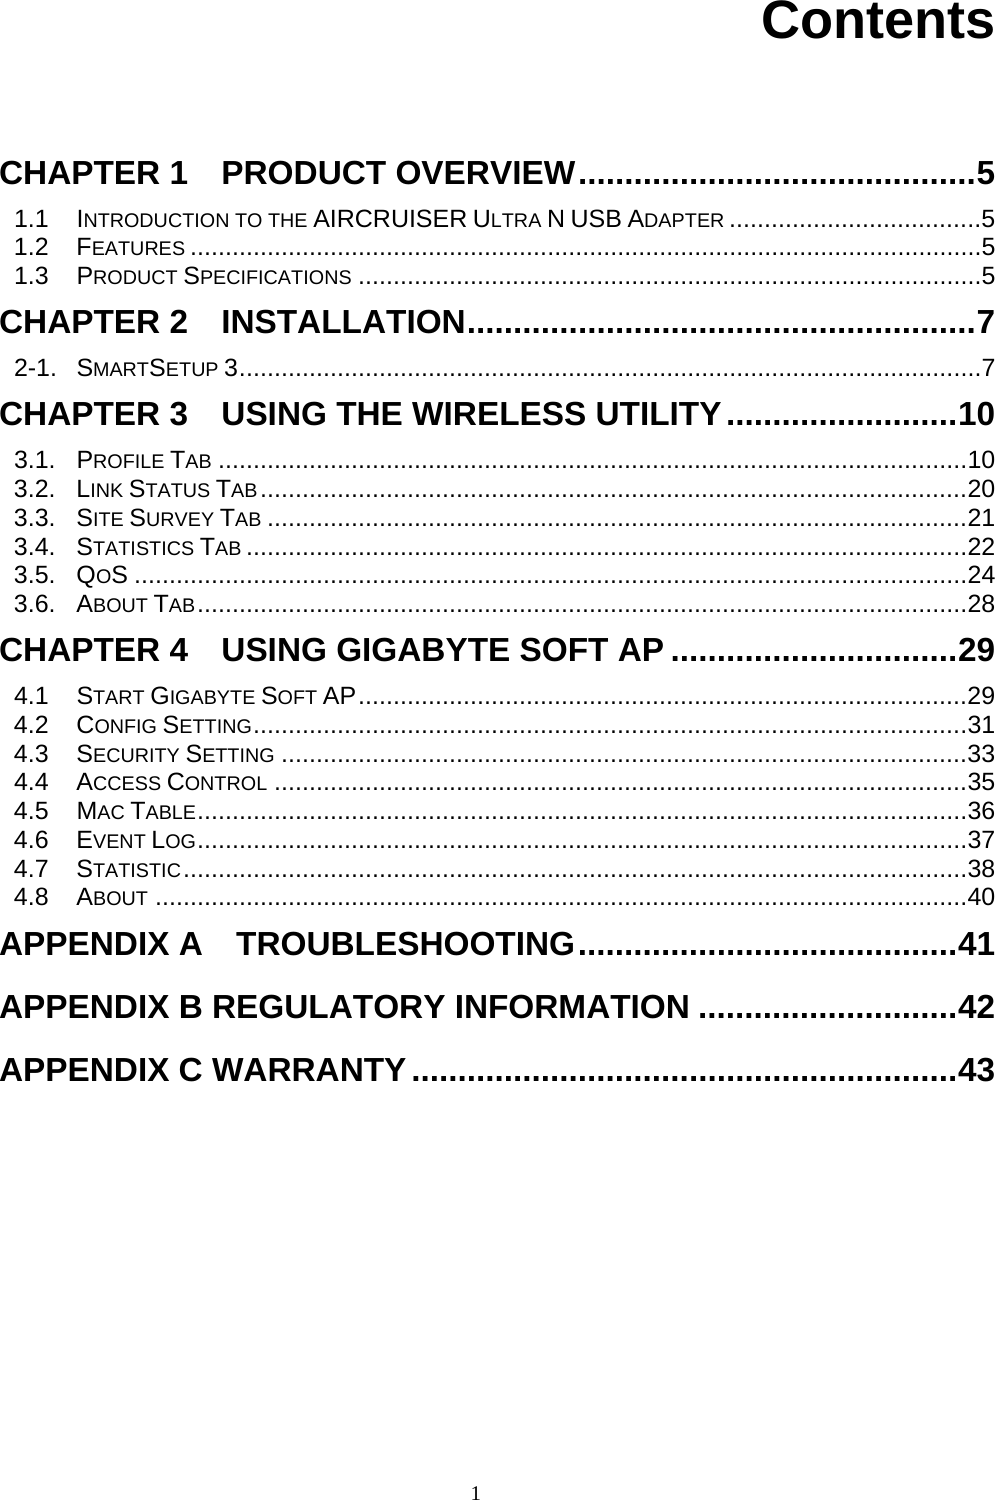 1     Contents   CHAPTER 1    PRODUCT OVERVIEW...........................................5 1.1 INTRODUCTION TO THE AIRCRUISER ULTRA N USB ADAPTER ....................................5 1.2 FEATURES .................................................................................................................5 1.3 PRODUCT SPECIFICATIONS .........................................................................................5 CHAPTER 2  INSTALLATION.......................................................7 2-1. SMARTSETUP 3..........................................................................................................7 CHAPTER 3    USING THE WIRELESS UTILITY.........................10 3.1. PROFILE TAB ...........................................................................................................10 3.2. LINK STATUS TAB.....................................................................................................20 3.3. SITE SURVEY TAB ....................................................................................................21 3.4. STATISTICS TAB .......................................................................................................22 3.5. QOS .......................................................................................................................24 3.6. ABOUT TAB..............................................................................................................28 CHAPTER 4    USING GIGABYTE SOFT AP ...............................29 4.1 START GIGABYTE SOFT AP.......................................................................................29 4.2 CONFIG SETTING......................................................................................................31 4.3 SECURITY SETTING ..................................................................................................33 4.4 ACCESS CONTROL ...................................................................................................35 4.5 MAC TABLE..............................................................................................................36 4.6 EVENT LOG..............................................................................................................37 4.7 STATISTIC................................................................................................................38 4.8 ABOUT ....................................................................................................................40 APPENDIX A  TROUBLESHOOTING.........................................41 APPENDIX B REGULATORY INFORMATION ............................42 APPENDIX C WARRANTY...........................................................43 